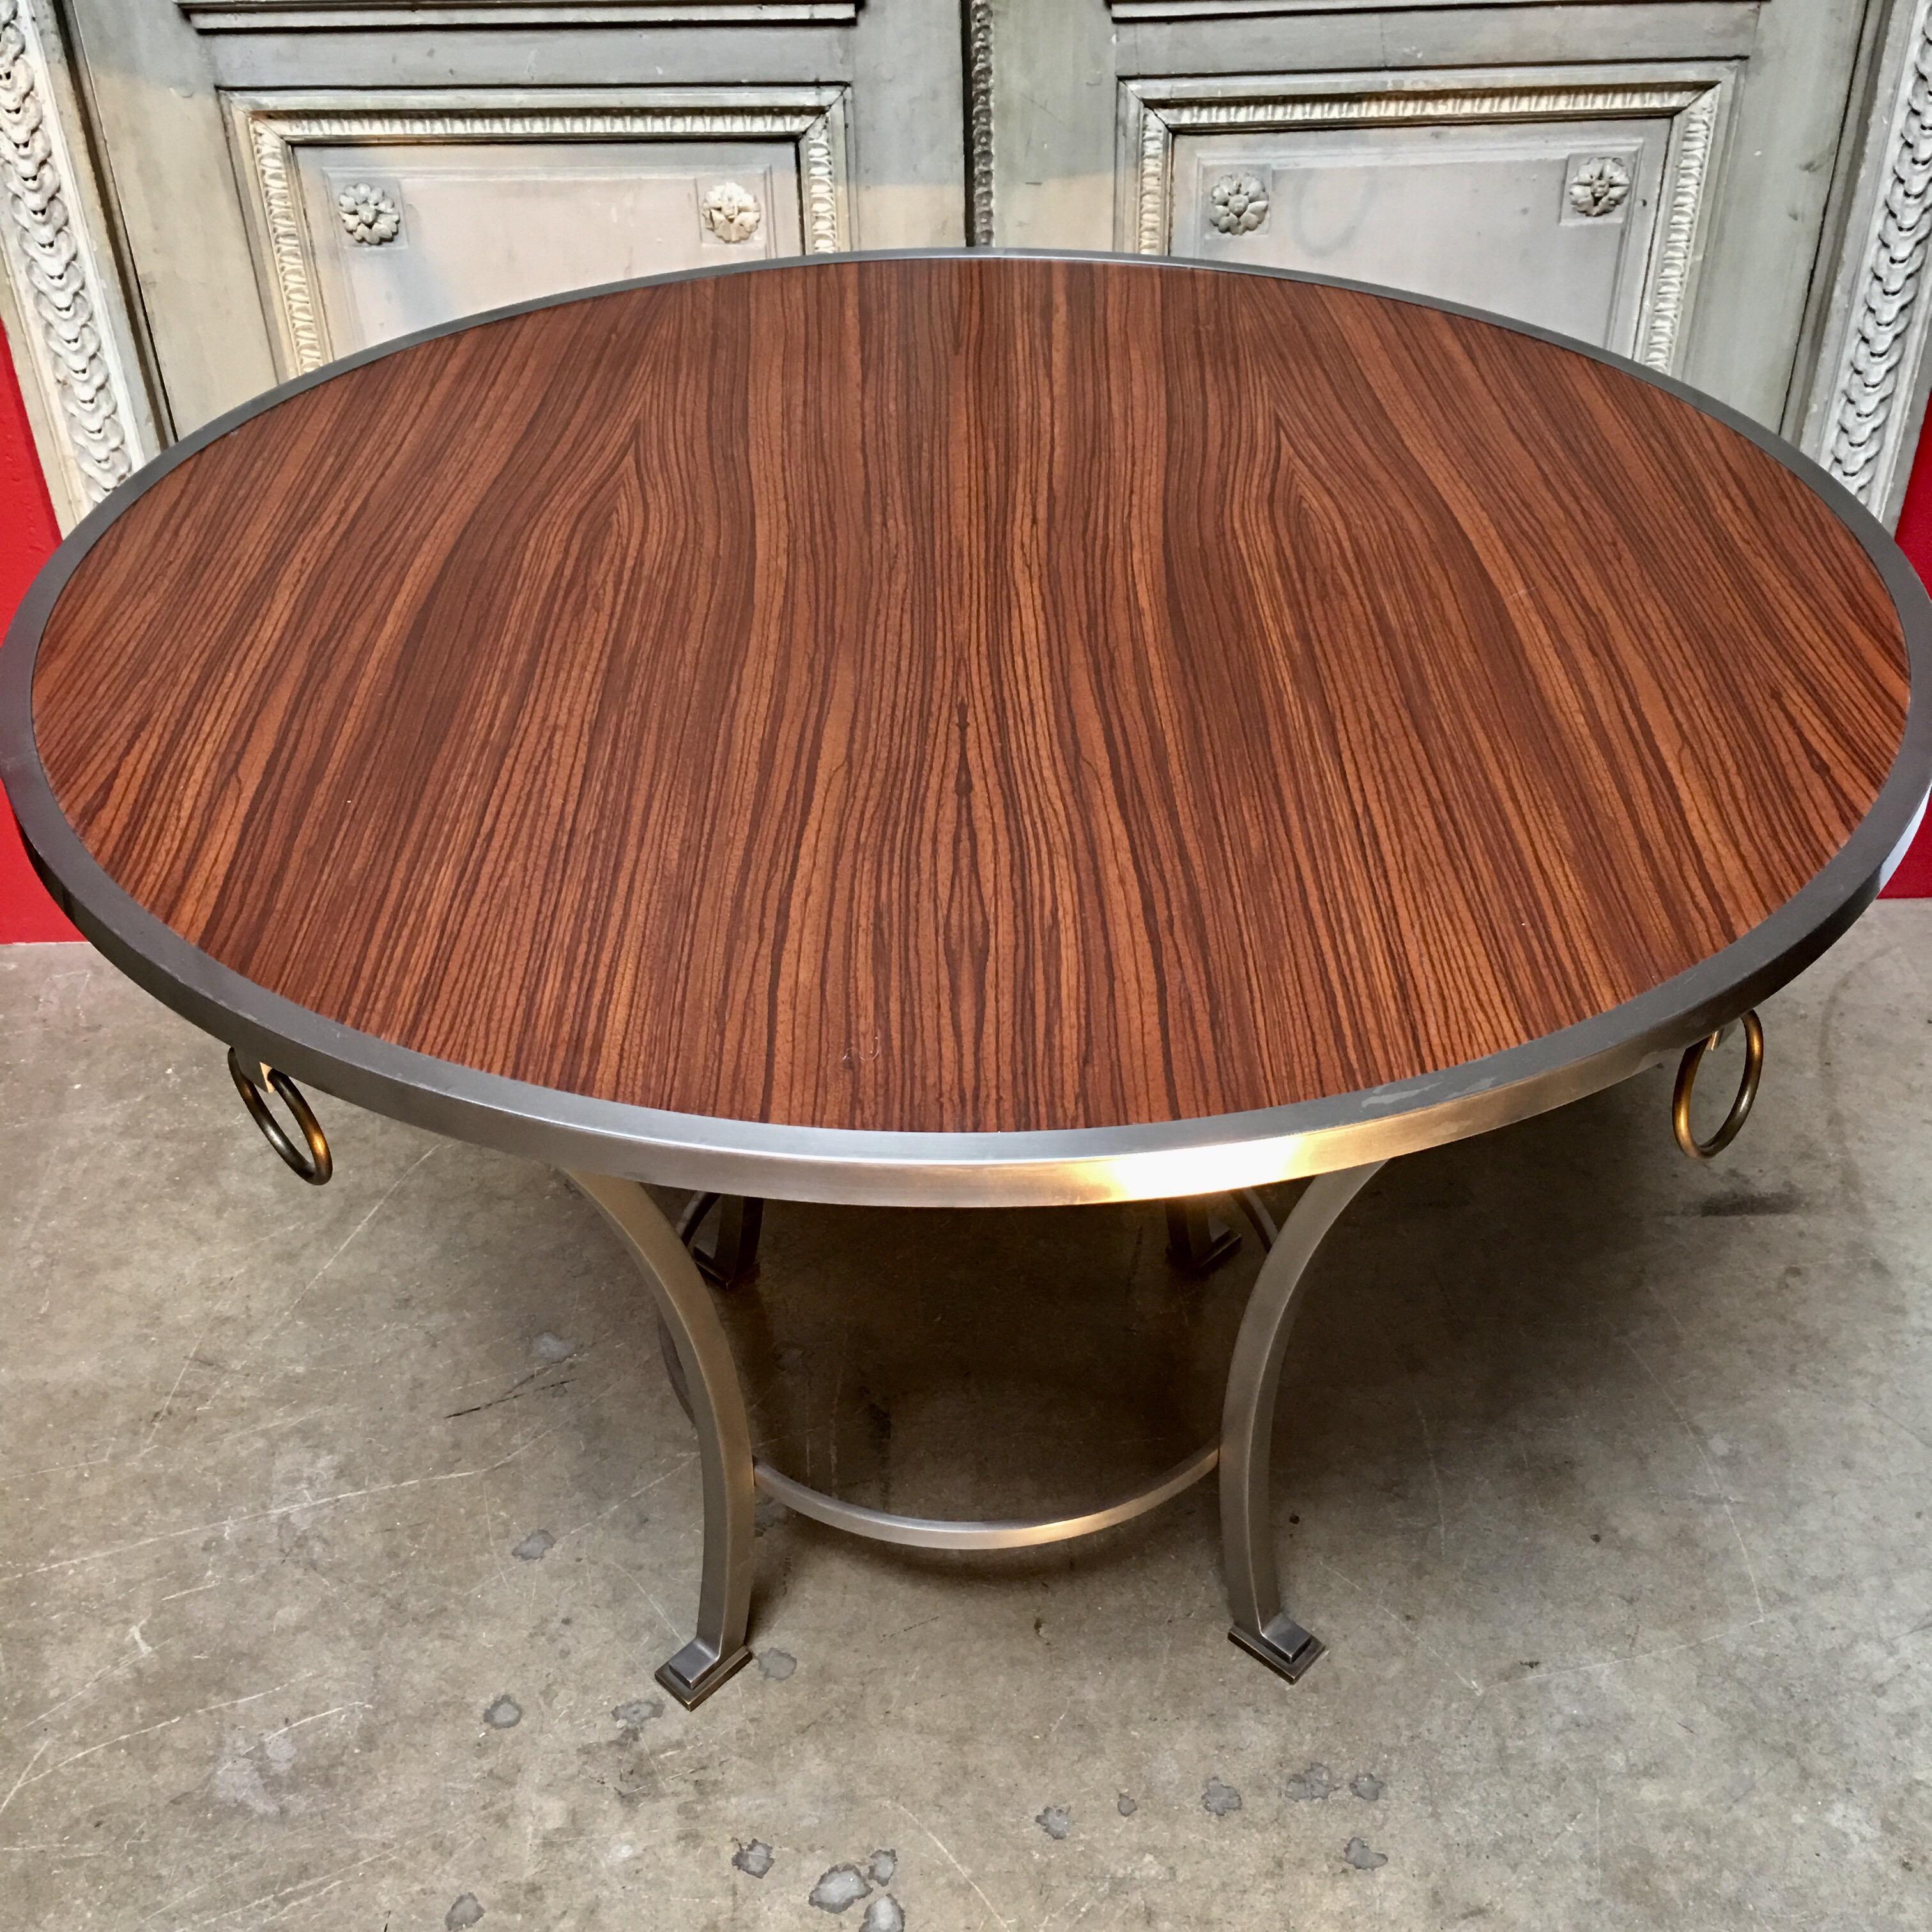 A contemporary zebra wood top table with steel frame that can be used for a dining table, center table or game table. The table has a beautiful modern look that can work with both contemporary and traditional designs. 